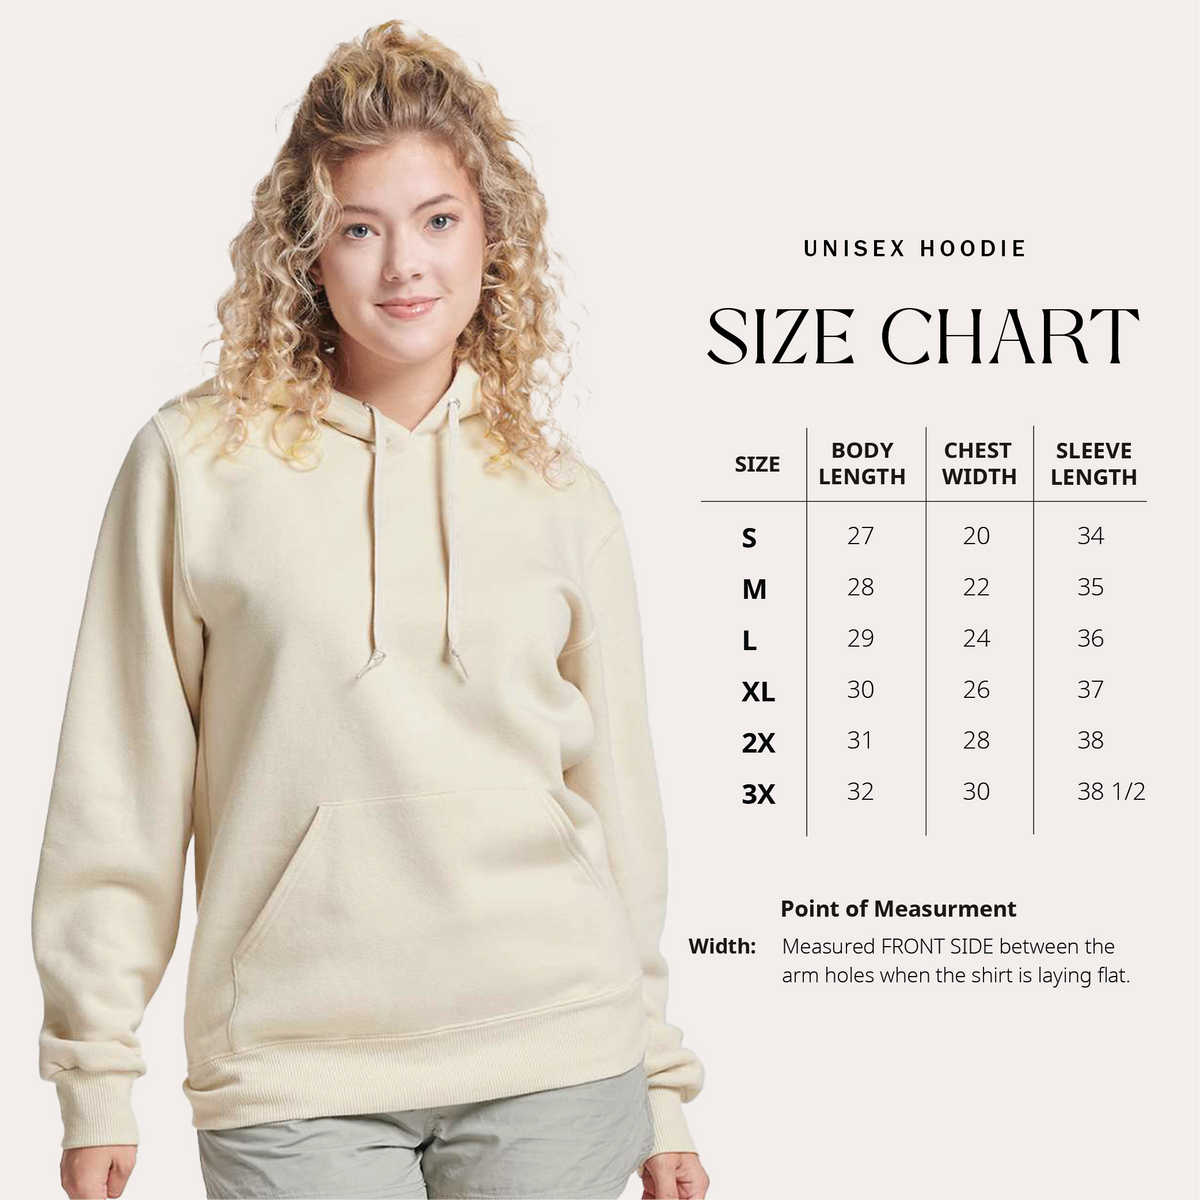 woman is wearing cozy cream fleece hoodie and a size chart next to